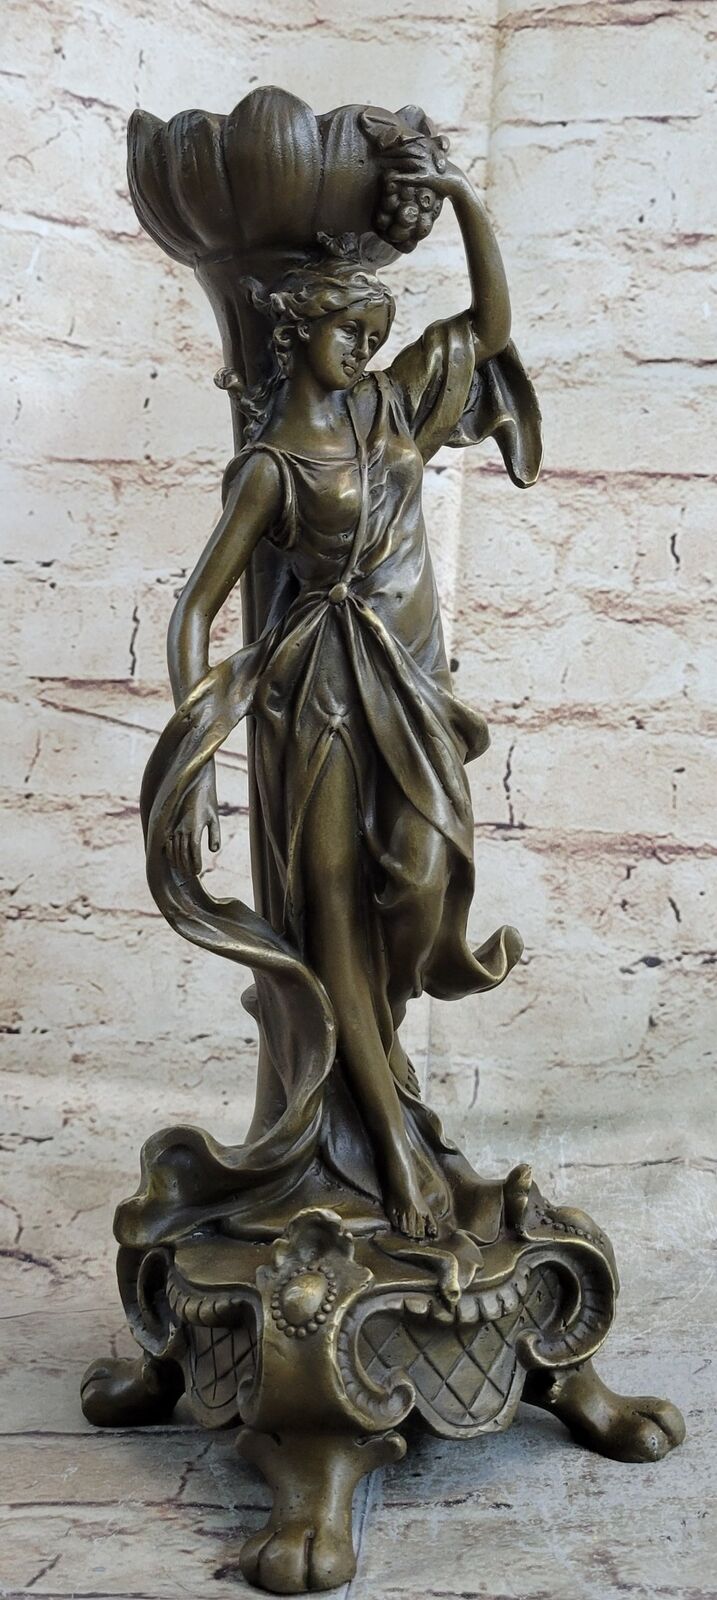 VICTORIAN MYTHOLOGY SEXY WOMAN SOLID BRONZE CANDLESTICK CANDLE HOLDER ARTWORK NR